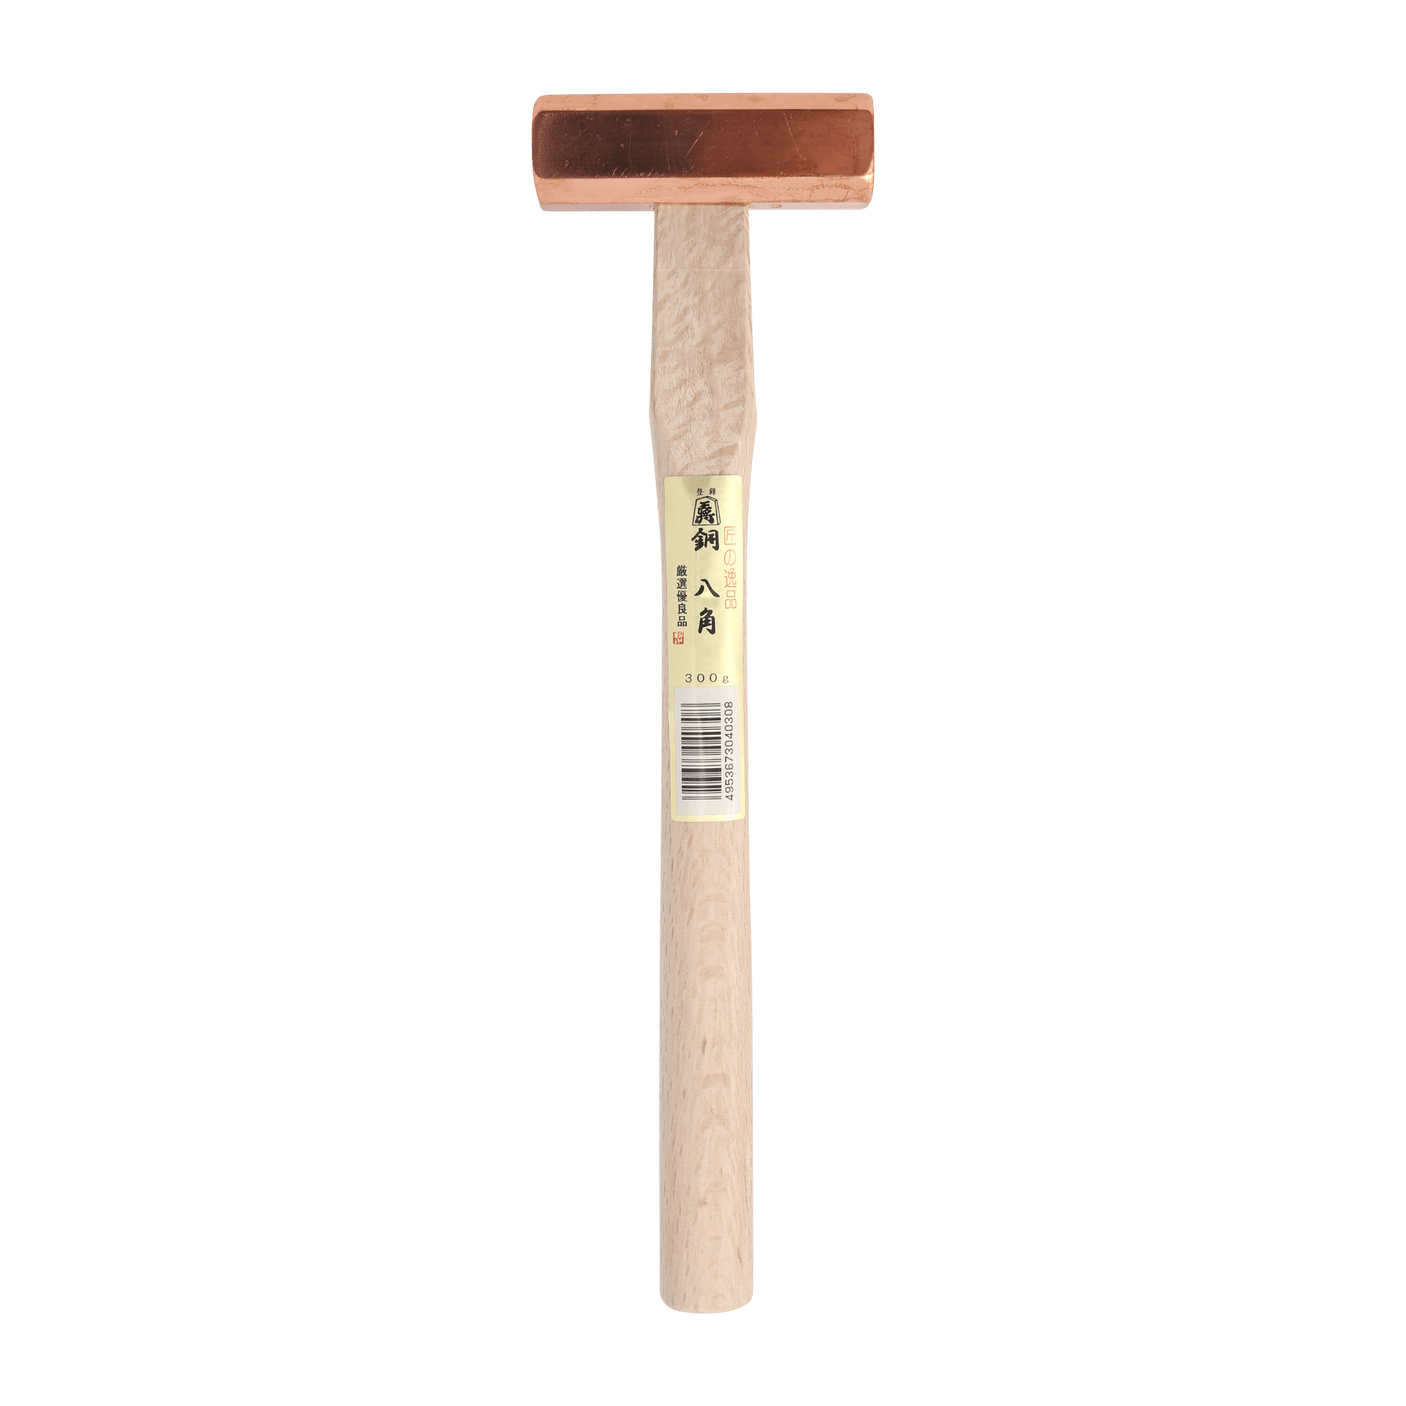 Copper 8-Kaku Hammer 300g by SUSA with White Oak handle - Hammers - Japanese Tools Australia